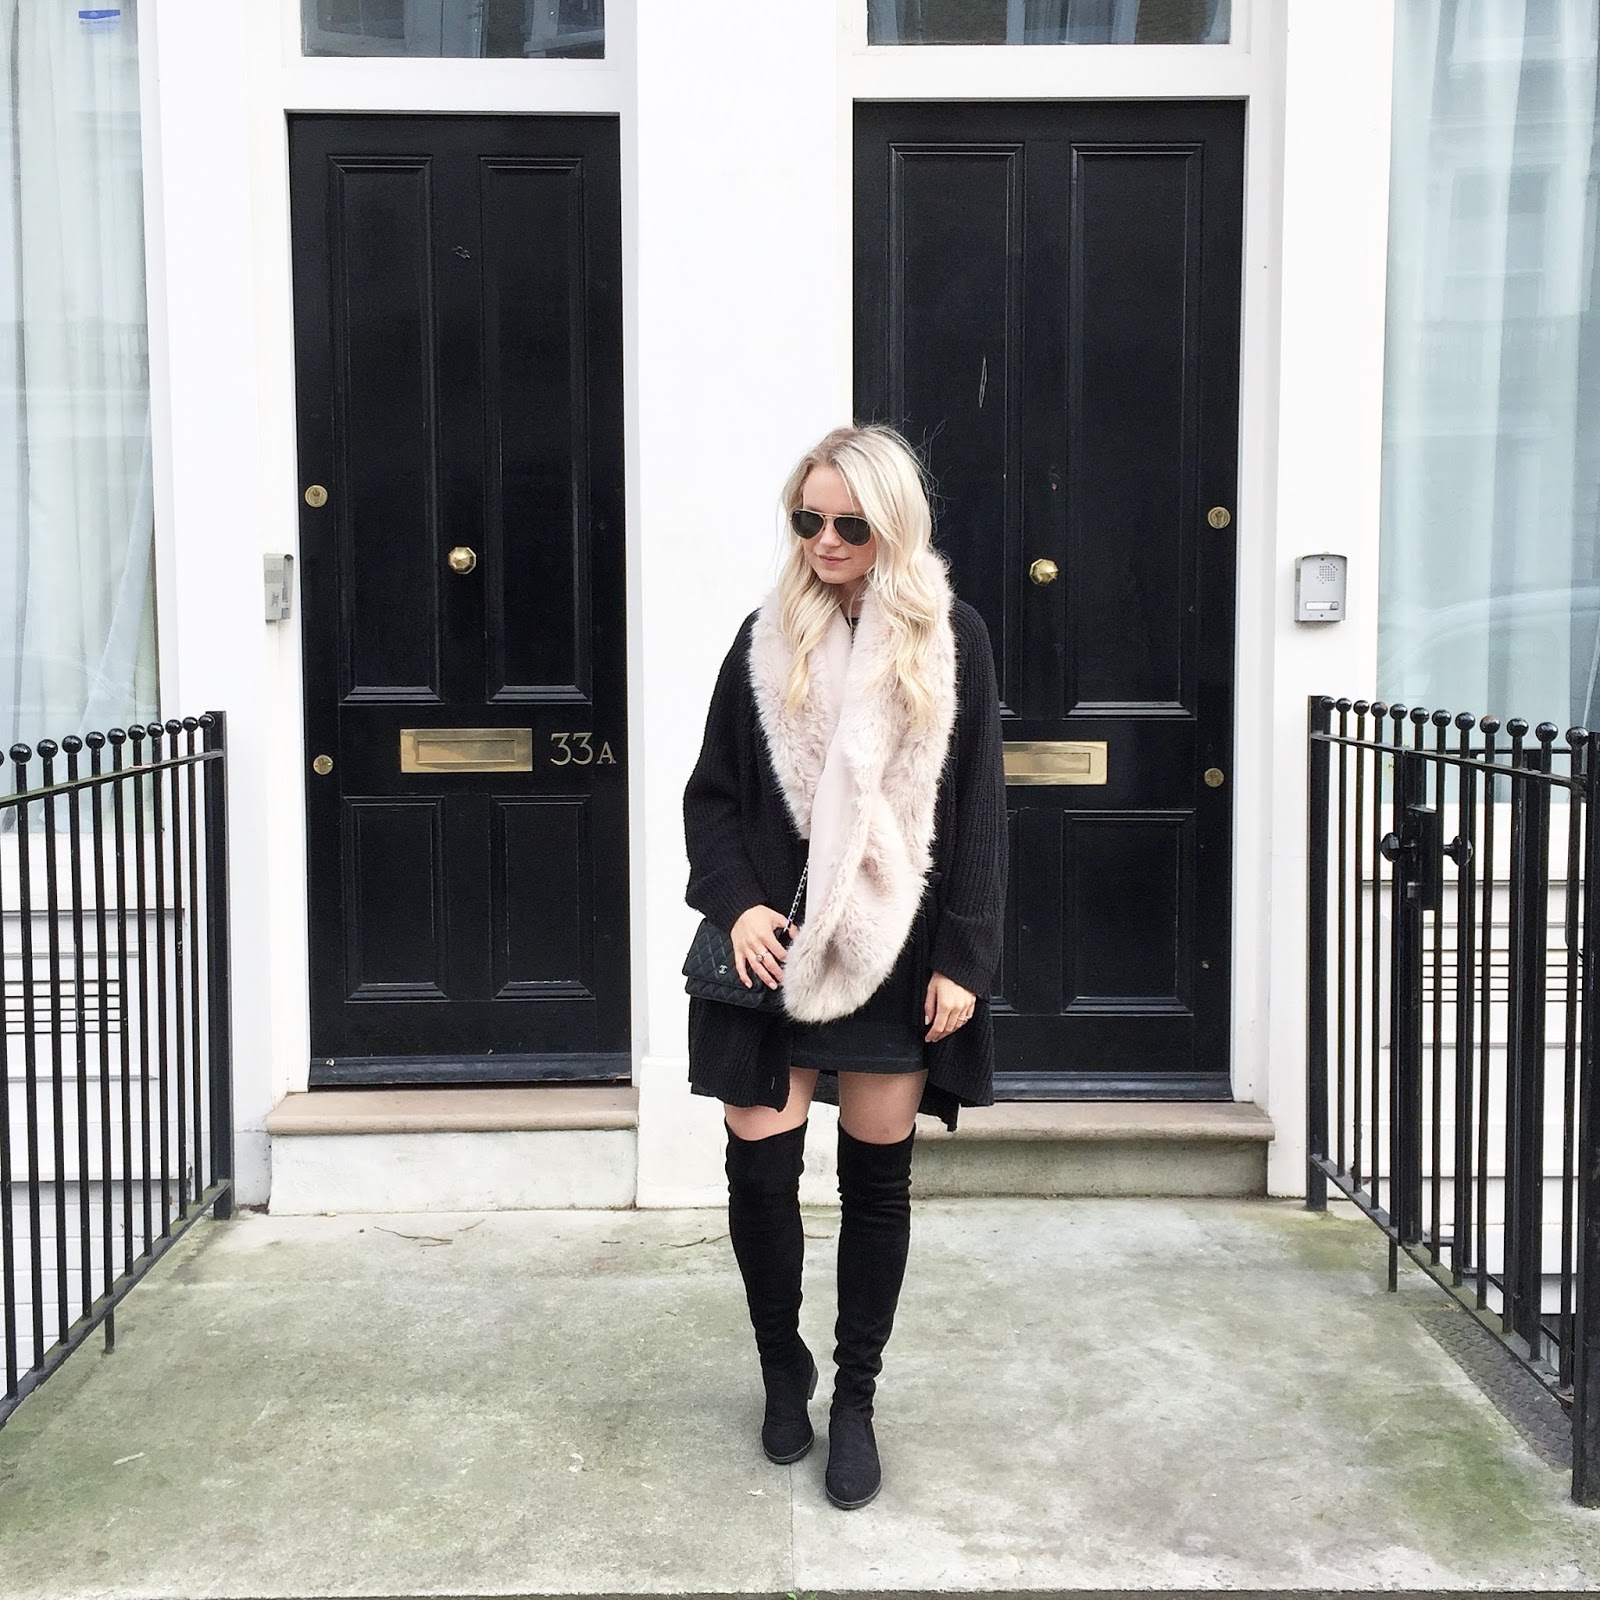 how to style over the knee boots